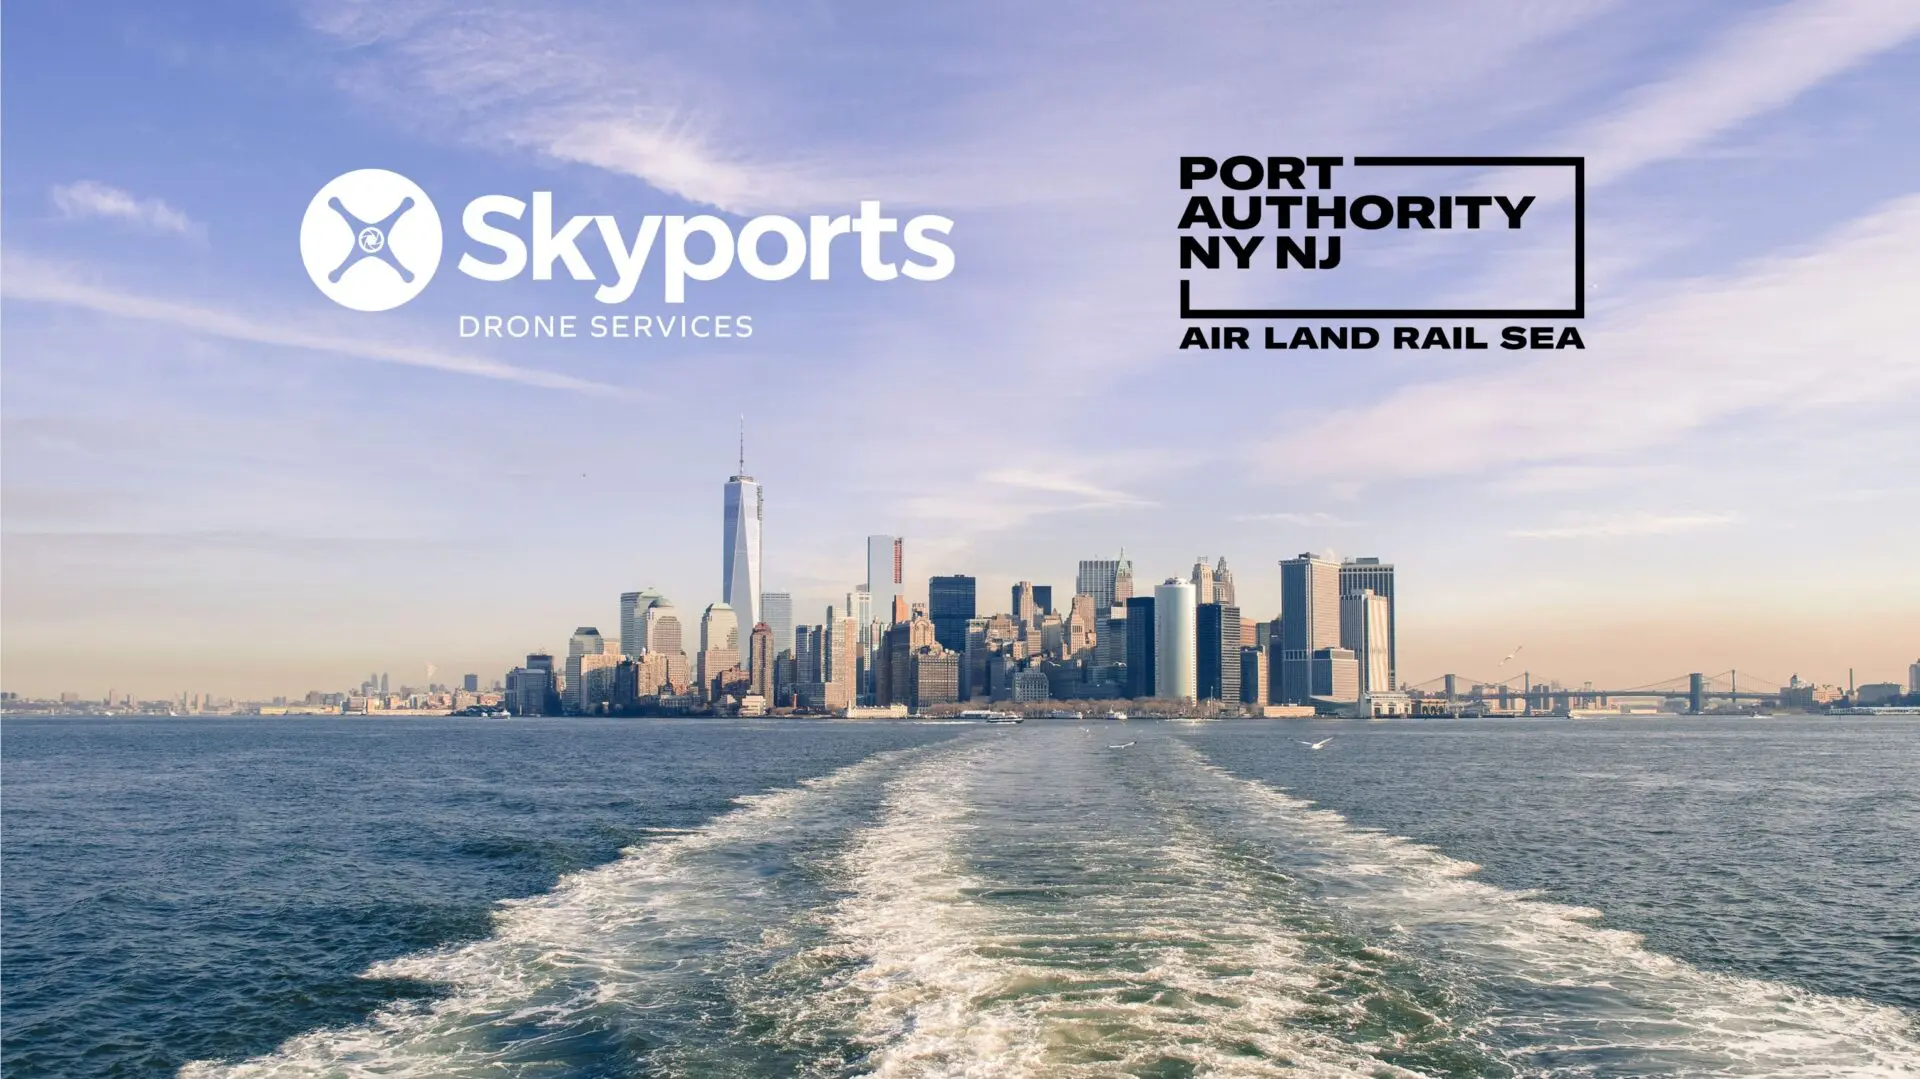 Skyports and Port Authority of New York and New Jersey to explore  middle-mile drone logistics - Skyports Drone Services